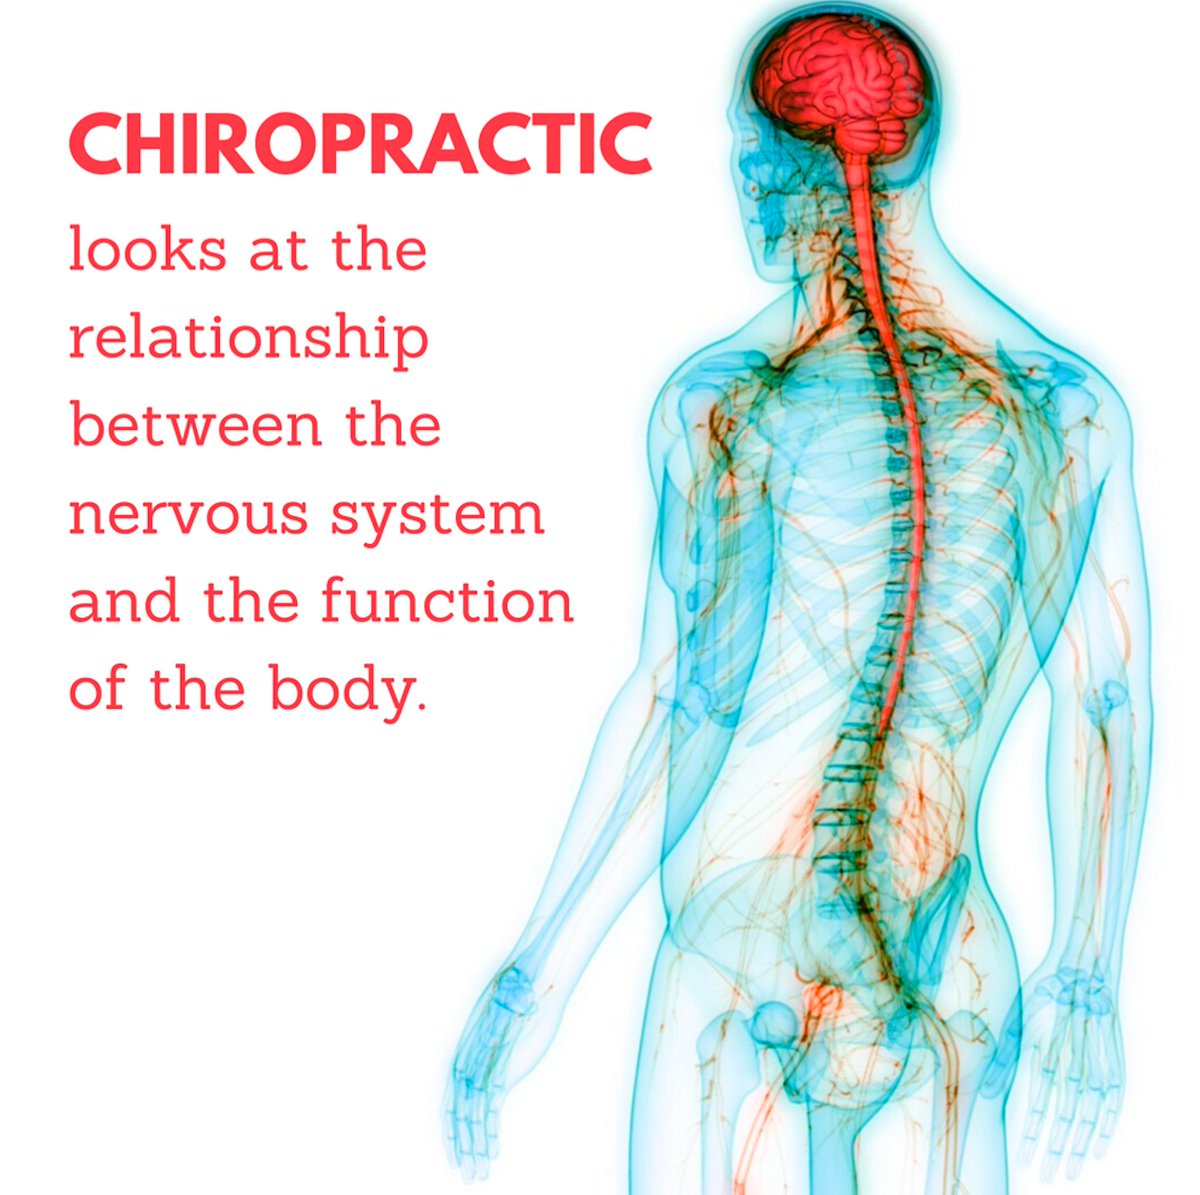 Chiropractic is an art, science, and philosophy that focuses on the relationship between the nervous system and function (health) of the body. #chiropractic #bodyfunction #health